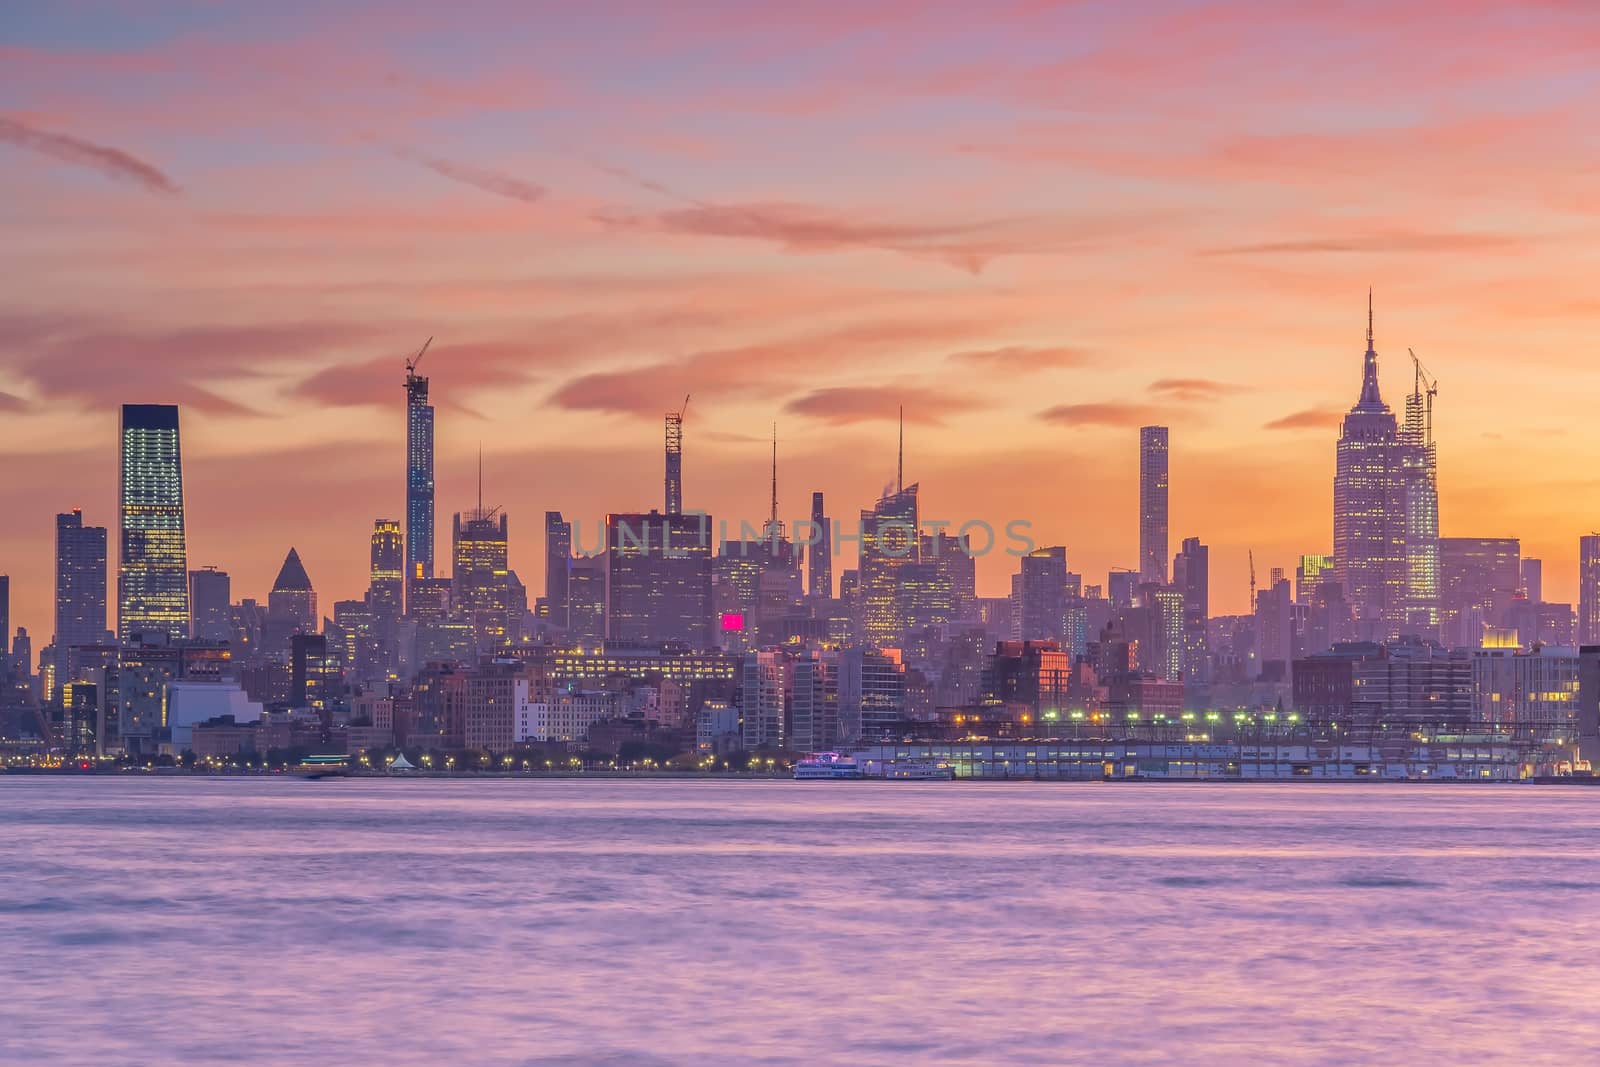 New York City downtown skyline at sunset - beautiful cityscape by f11photo